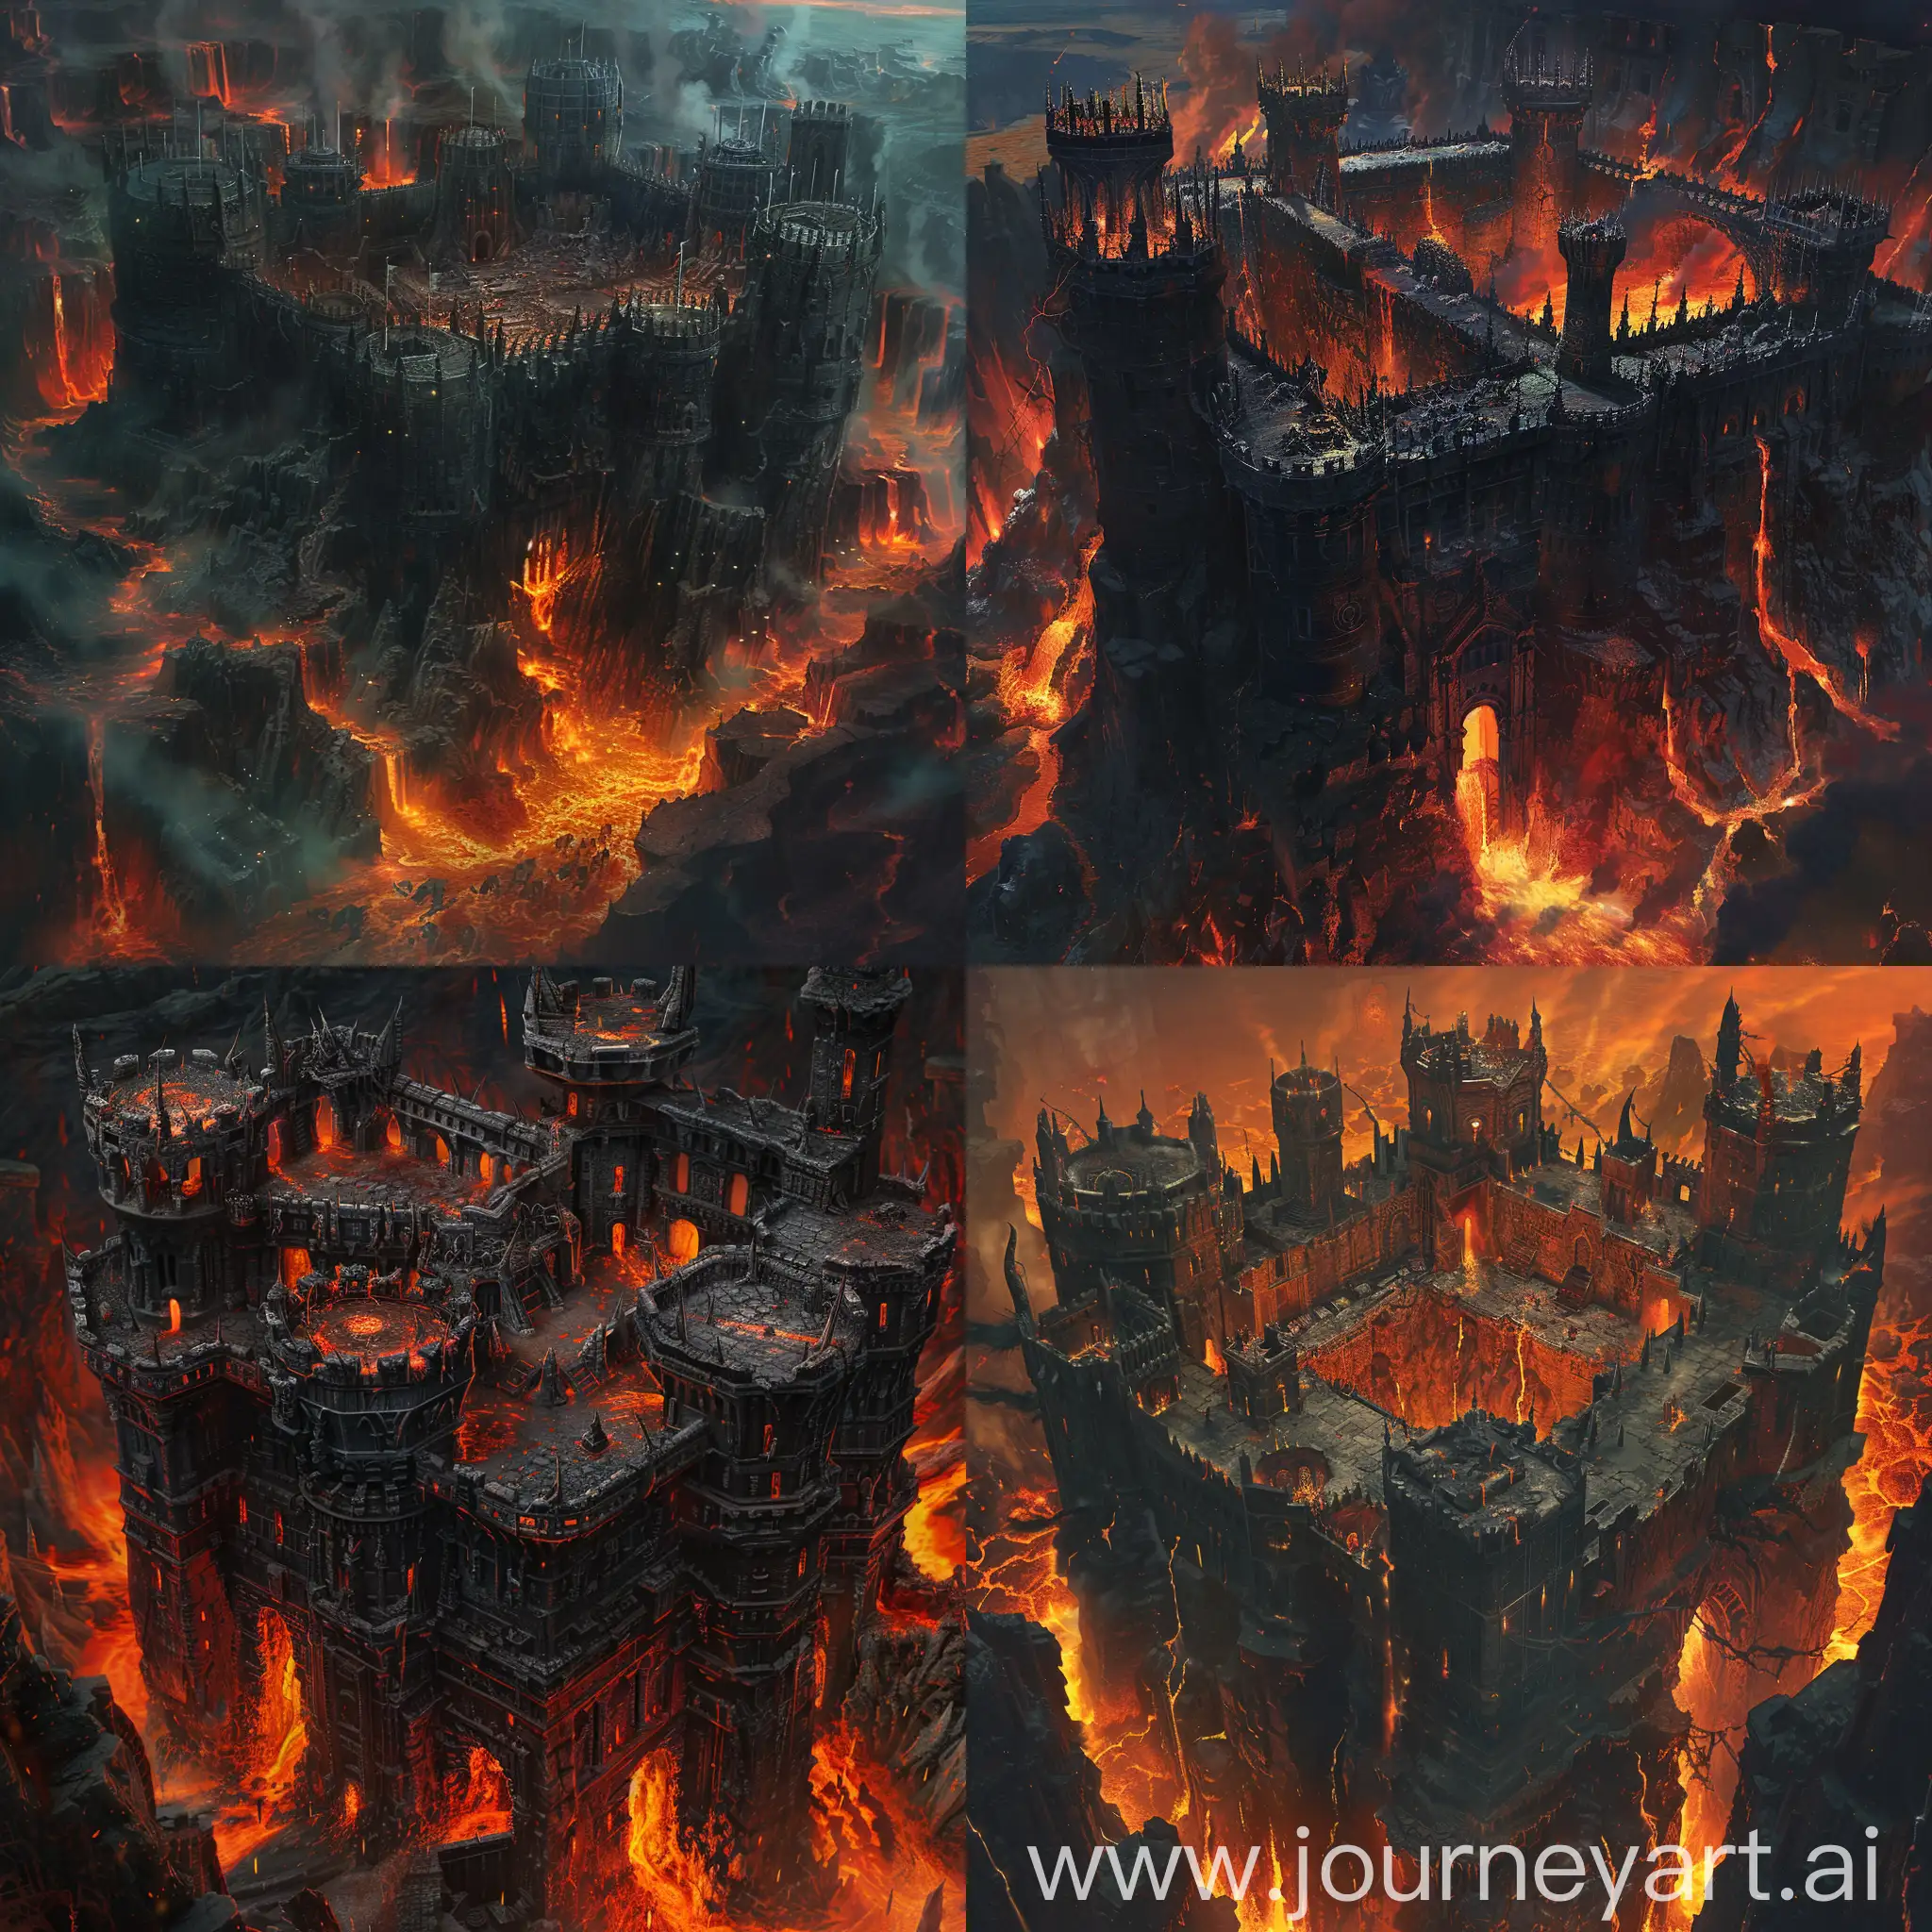 The Daevolos Fortress, erected in the depths of Avernus, in the False Larvae region, stands as a monolith of terror and power. Its fire-blackened walls enclose the Soul Market, a sinister place where devils trade captive souls, weighing their worth before subjecting them to eternal torment. This impenetrable citadel, surrounded by lava and desolation, resounds with the cries of despair of those who are traded and tortured there. The watchtowers, armed with sentinels, tirelessly watch the burning horizons, ready to defend their domain against any incursion. Without a doubt, a dark bastion where order and submission reign.